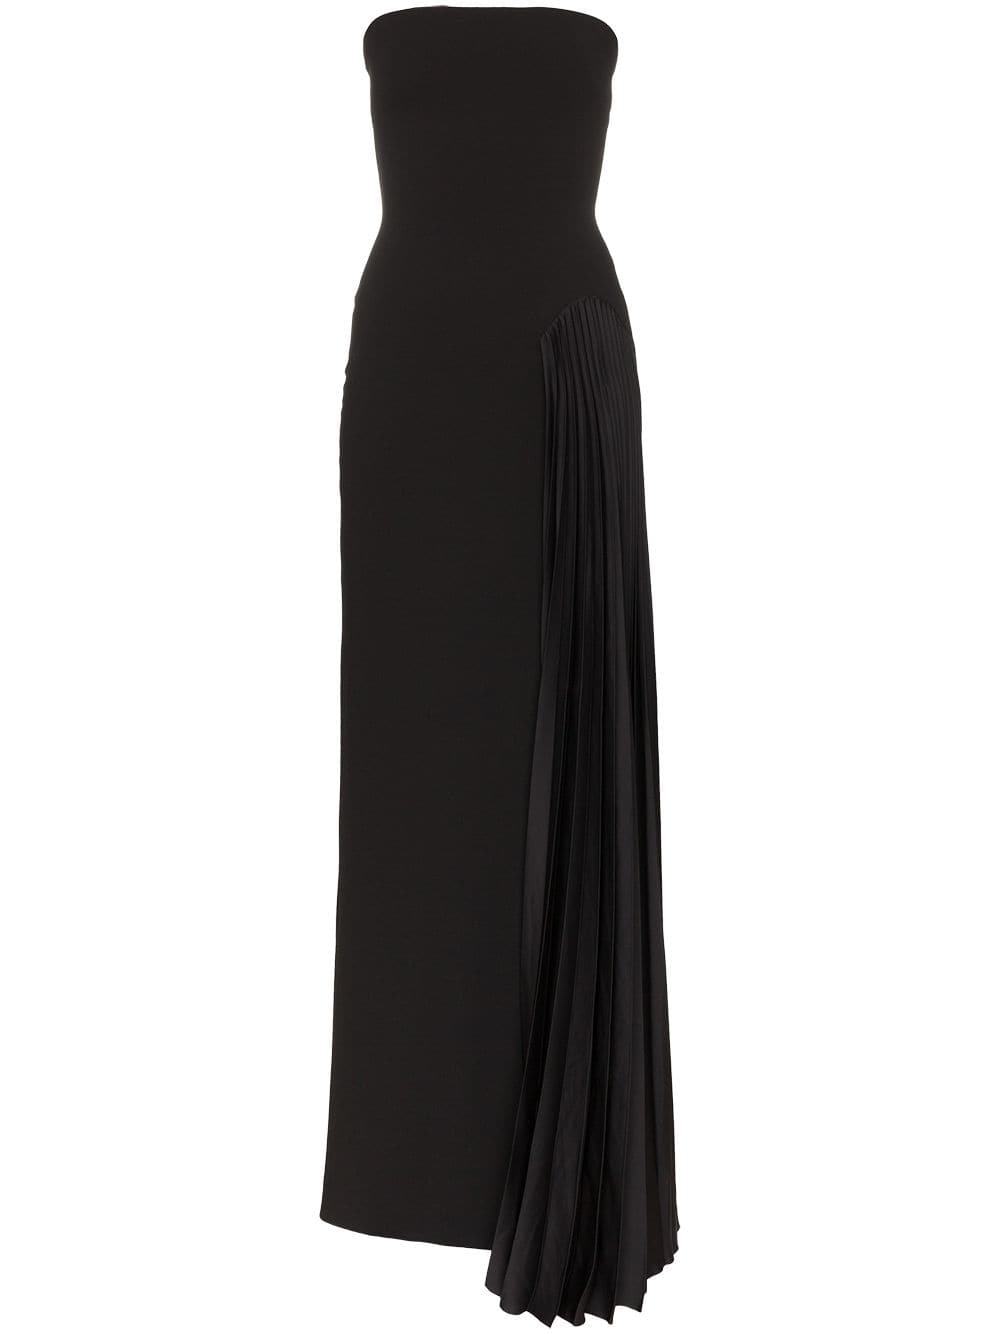 Solace London - Dolly Strapless Maxi Dress | ABOUT ICONS